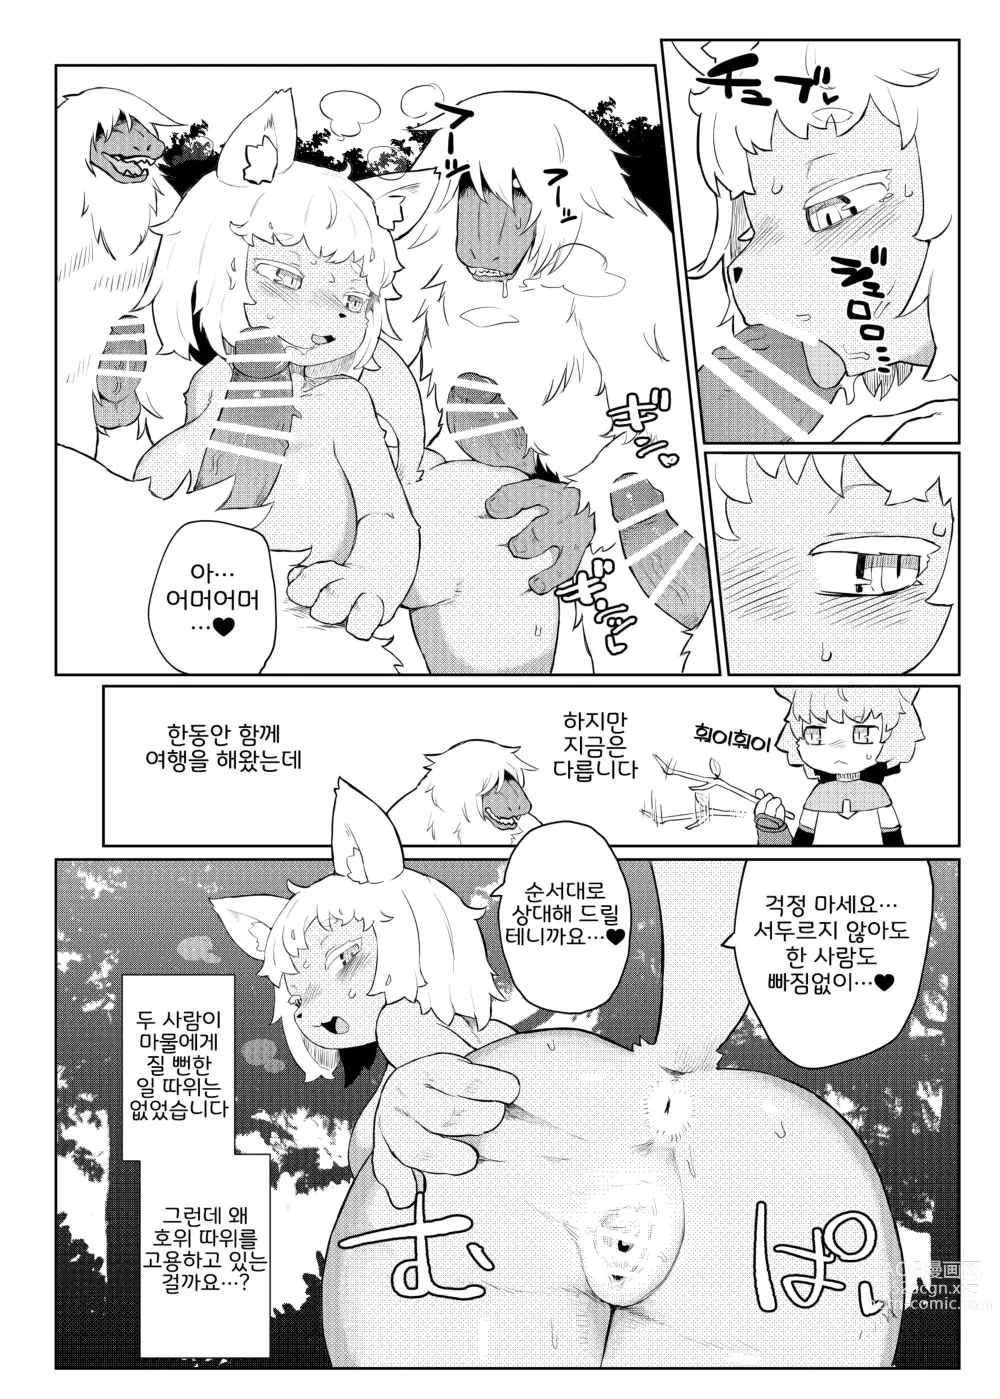 Page 7 of doujinshi BootyQuest